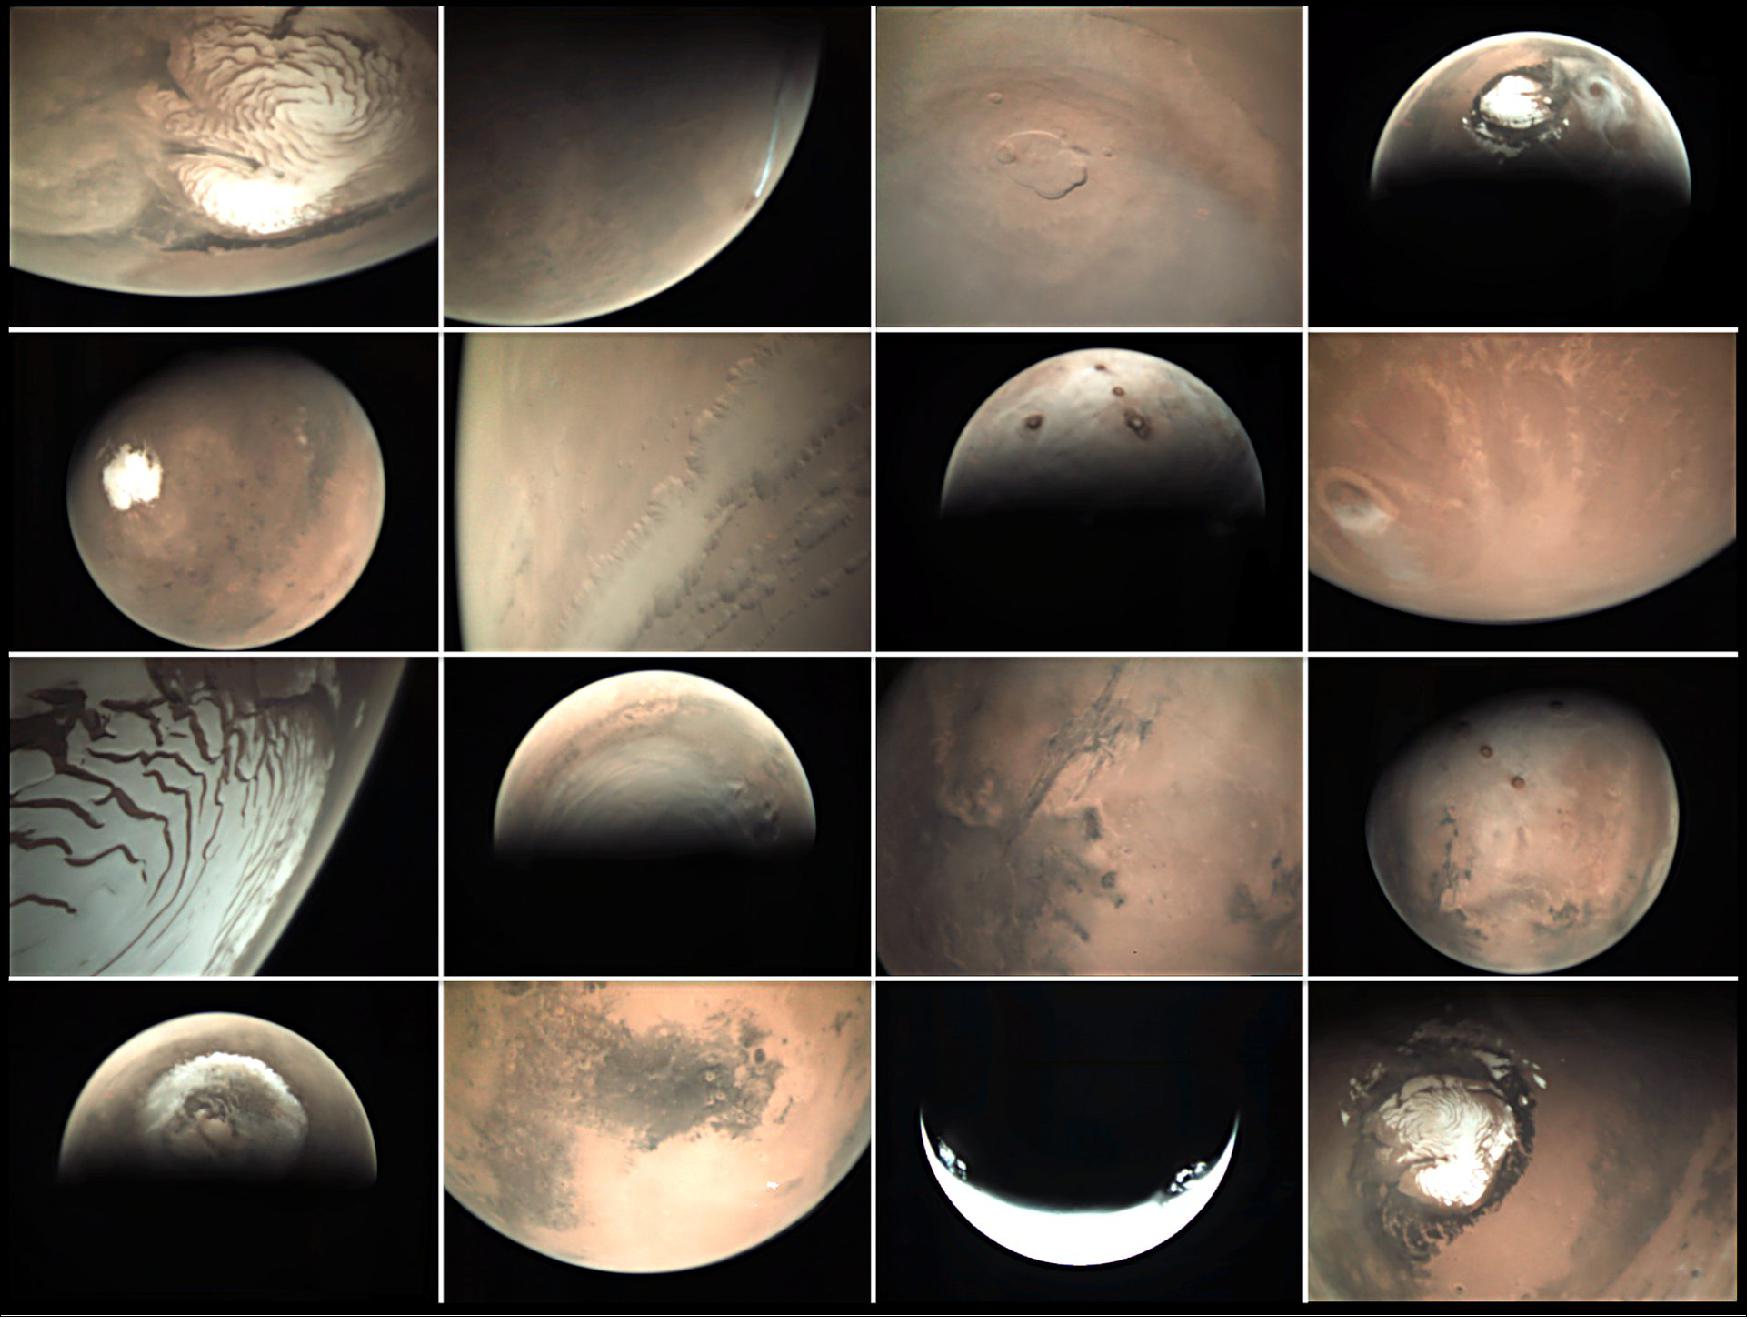 Figure 74: The image collage presented here highlights some of the beautiful views already captured by the camera and which are available in the archive and gallery. From left to right, row by row: Dust/water ice over the north pole (4 October 2019); Arsia Mons Elongated Cloud (12 November 2008); Olympus Mons caldera (19 October 2019); Double cyclone at the edge of the north pole (16 June 2012); Full disk of Mars with south pole visible (17 November 2016); Part of Valles Marineris with hazes present (12 November 2018); Tharsis Volcanoes and Olympus Mons (9 June 2010): Cloud over Olympus Mons (9 January 2019); Textured patterns in north polar cap (1 January 2020); Polar hoods (water ice clouds) over the north polar cap (28 December 2010): Valles Marineris canyon system (1 July 2008); Full disk of Mars with Tharsis volcanos visible (22 October 2017); Local dust storm over the north polar cap (6 September 2016); Syrtis Major (9 March 2020); Twilight clouds on Mars (25 November 2019); Close up of the south pole of Mars (8 August 2010), image credit: ESA/MEX/VMC, CC BY-SA 3.0 IGO)